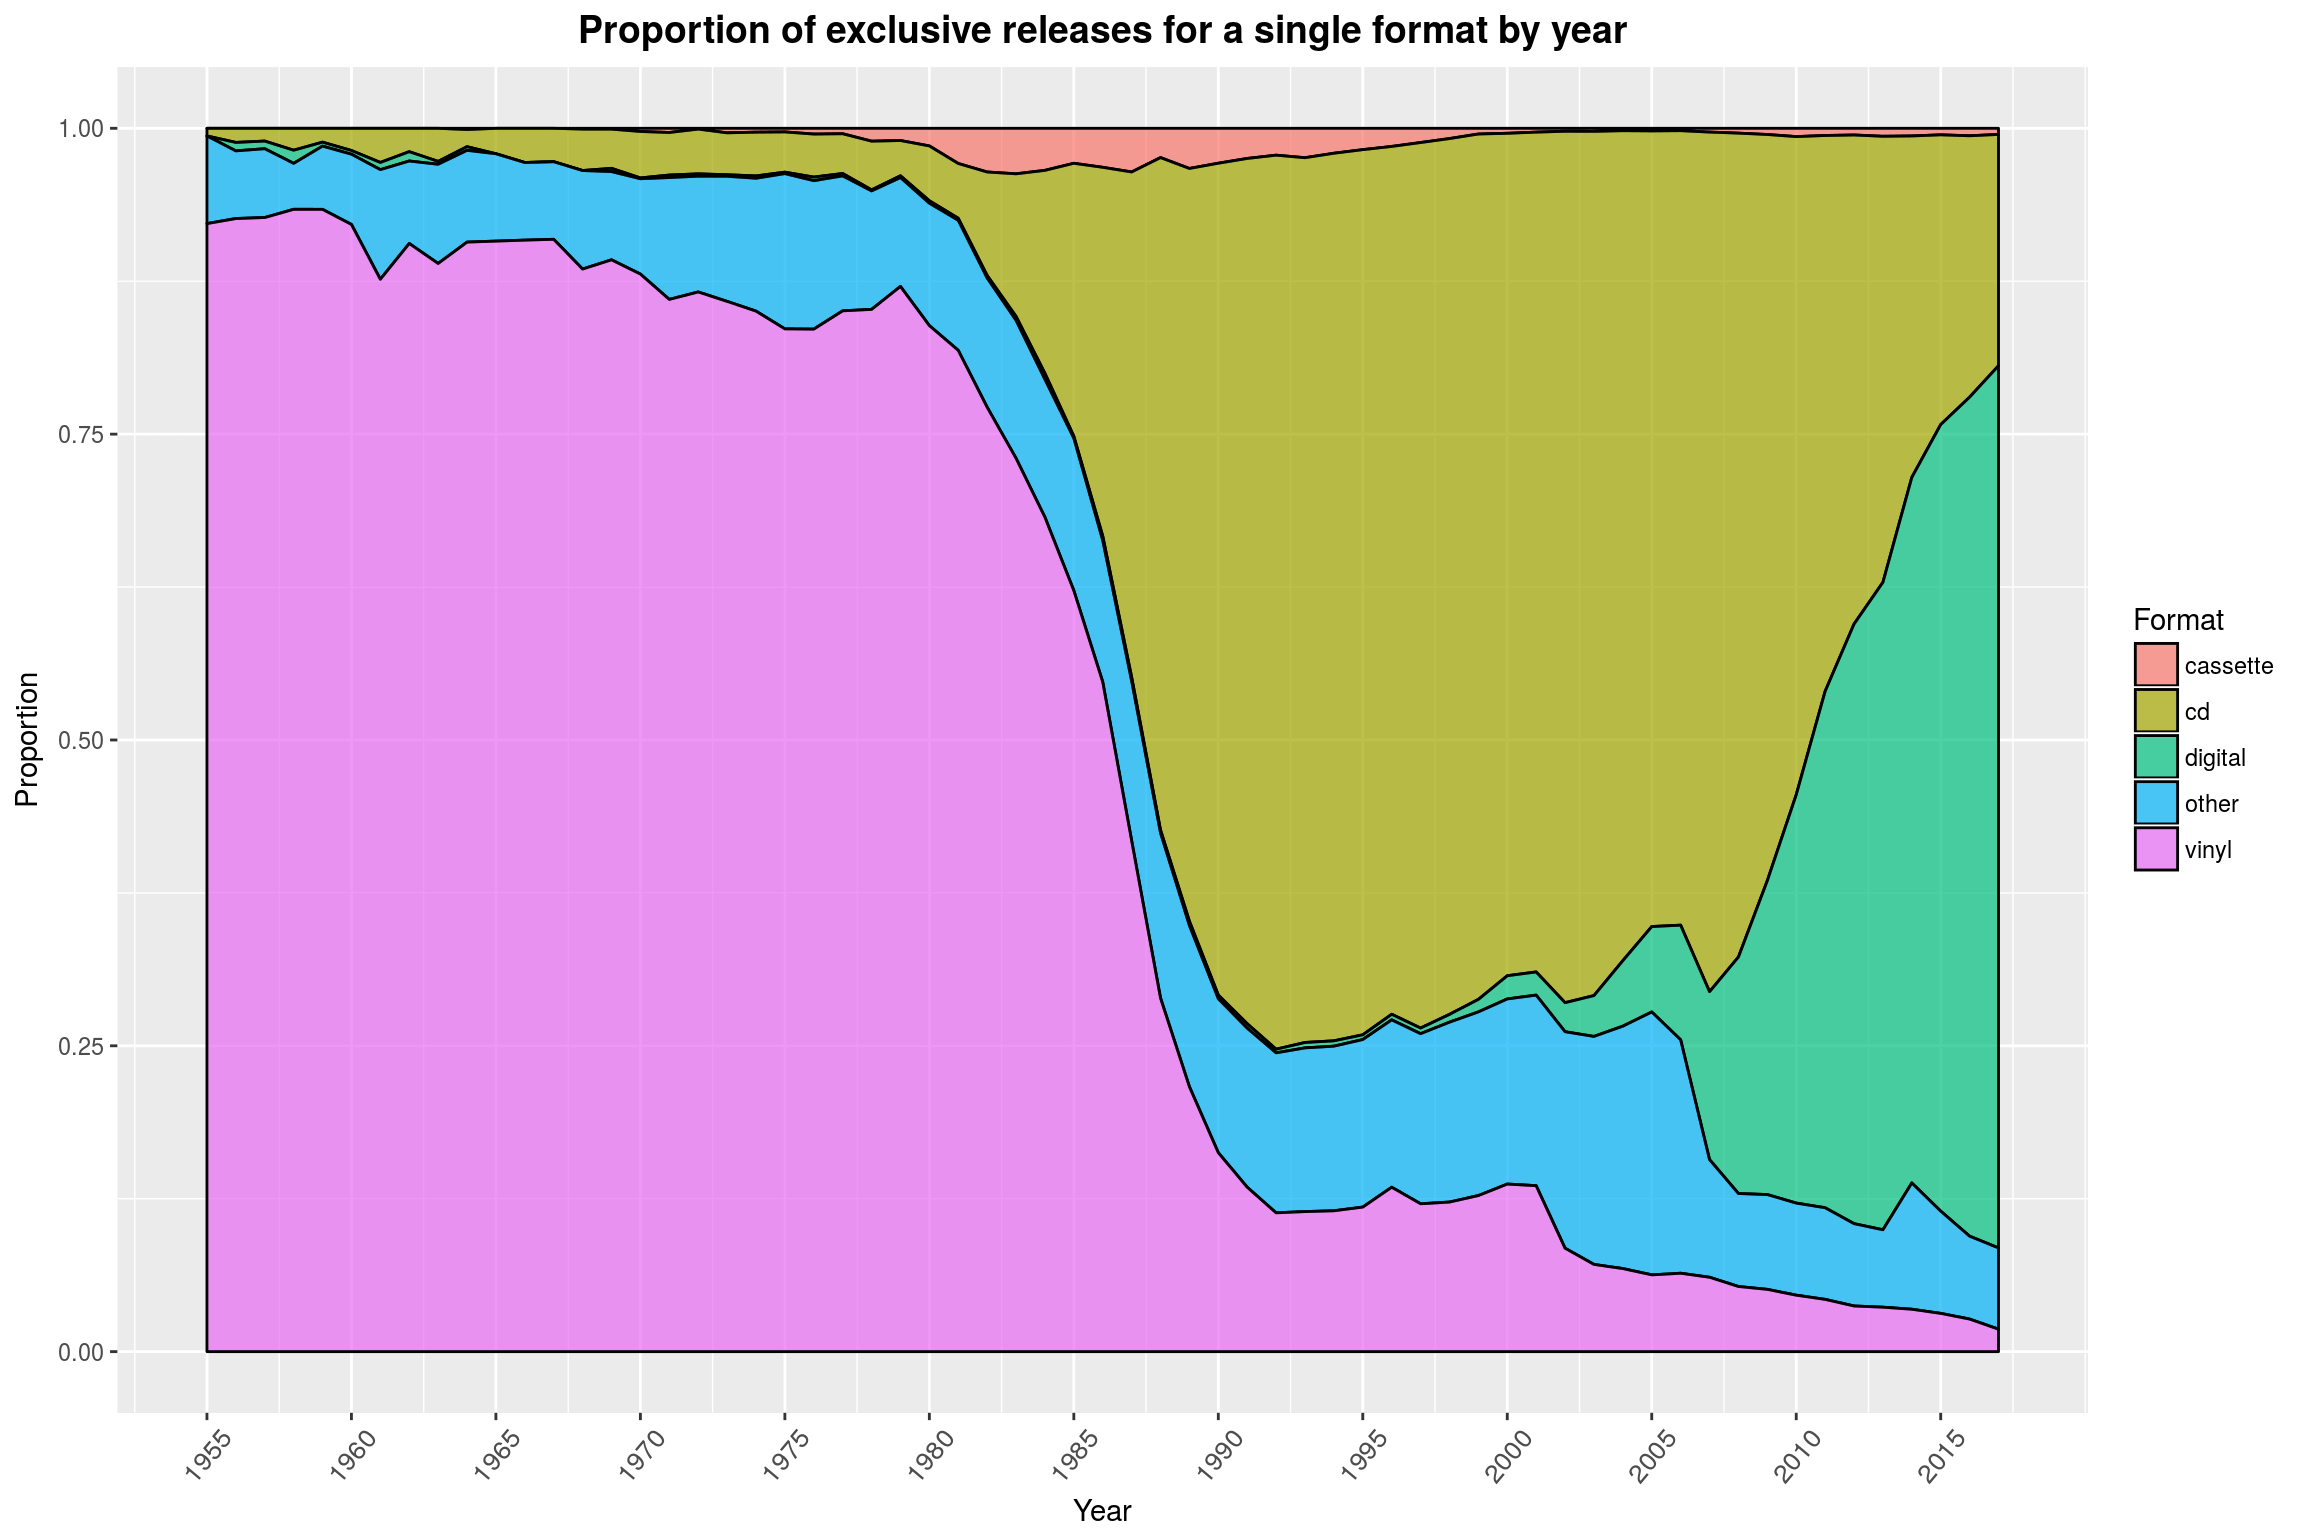 Proportion of exclusive releases for a single format by year